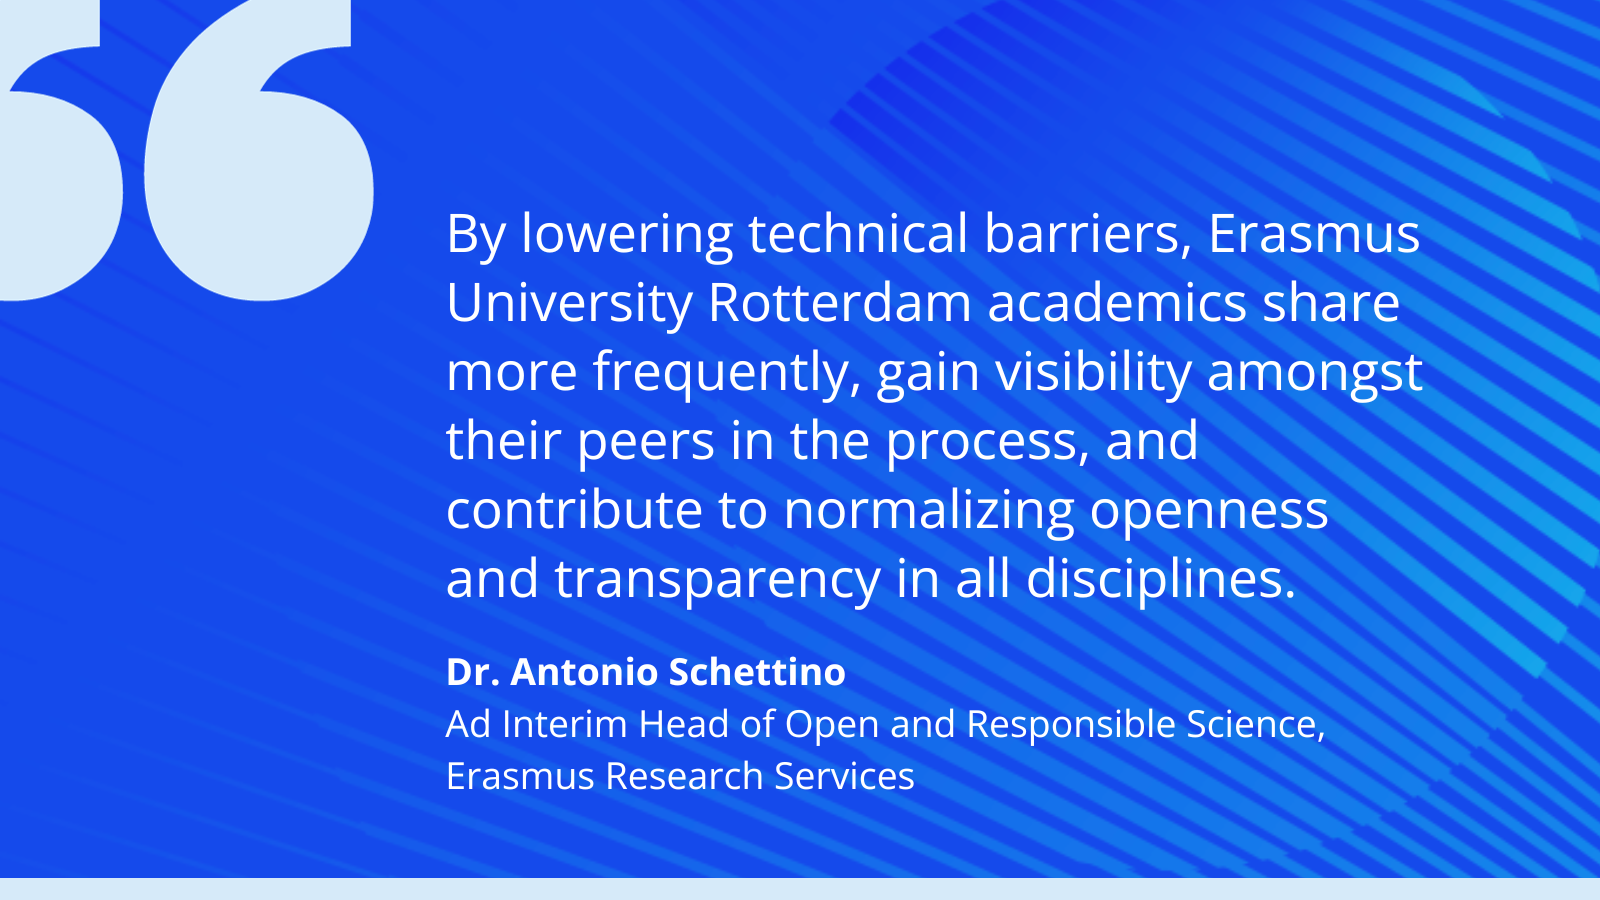 Blue background with quote: "By lowering technical barriers, EUR academics share more frequently, gain visibility amongst their peers in the process, and contribute to normalizing openness and transparency in all disciplines."